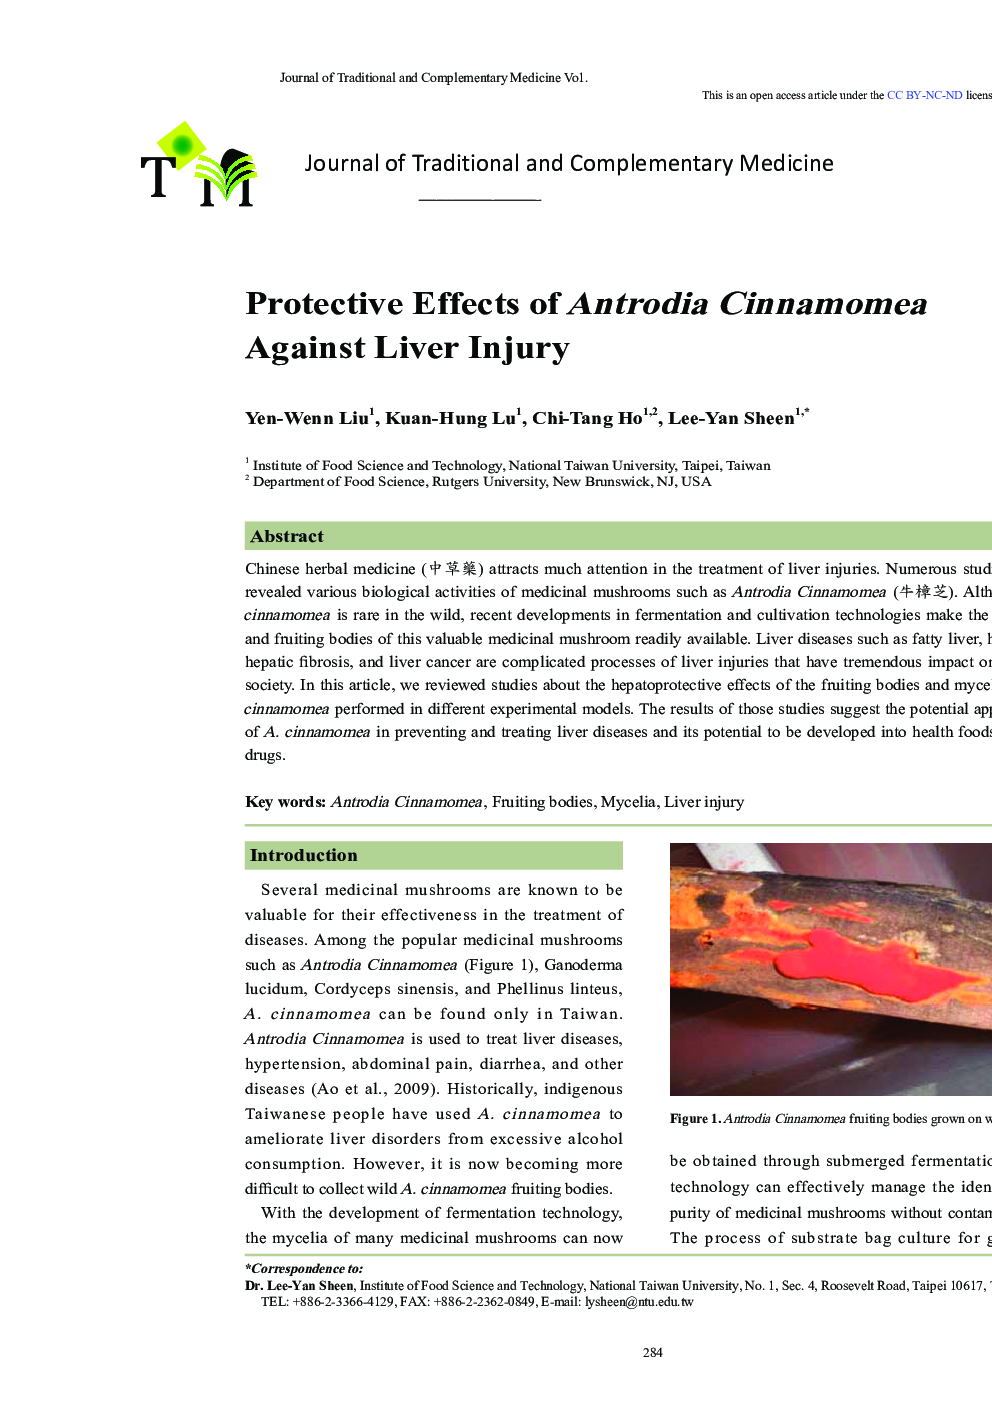 Protective Effects of Antrodia Cinnamomea Against Liver Injury